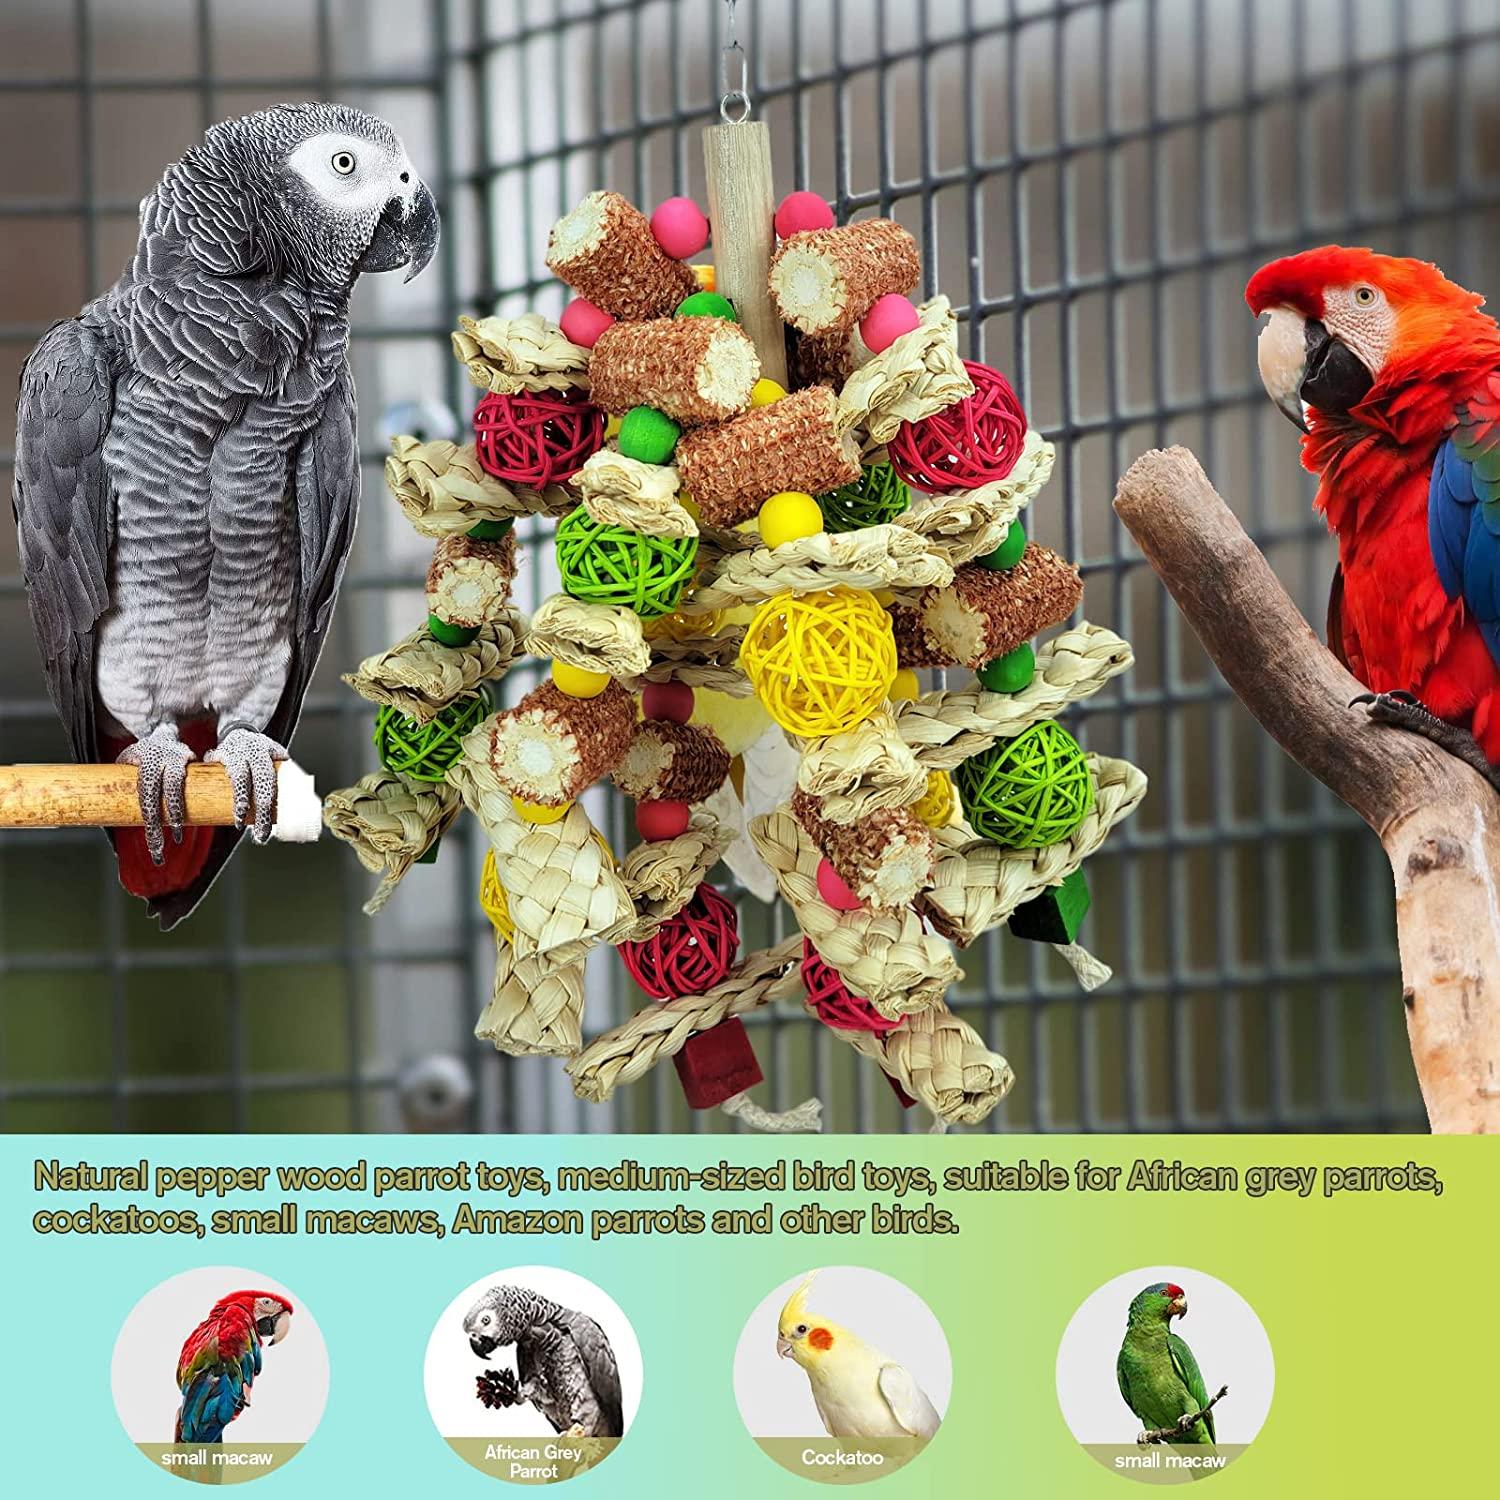 Parrot Natural Corn cob Chewing Bird Toys, Suitable for Small and Macaws, African Gray Parrots and a Variety of Amazon Parrots, Love Birds Medium-Sized Bird cage Accessories Toys